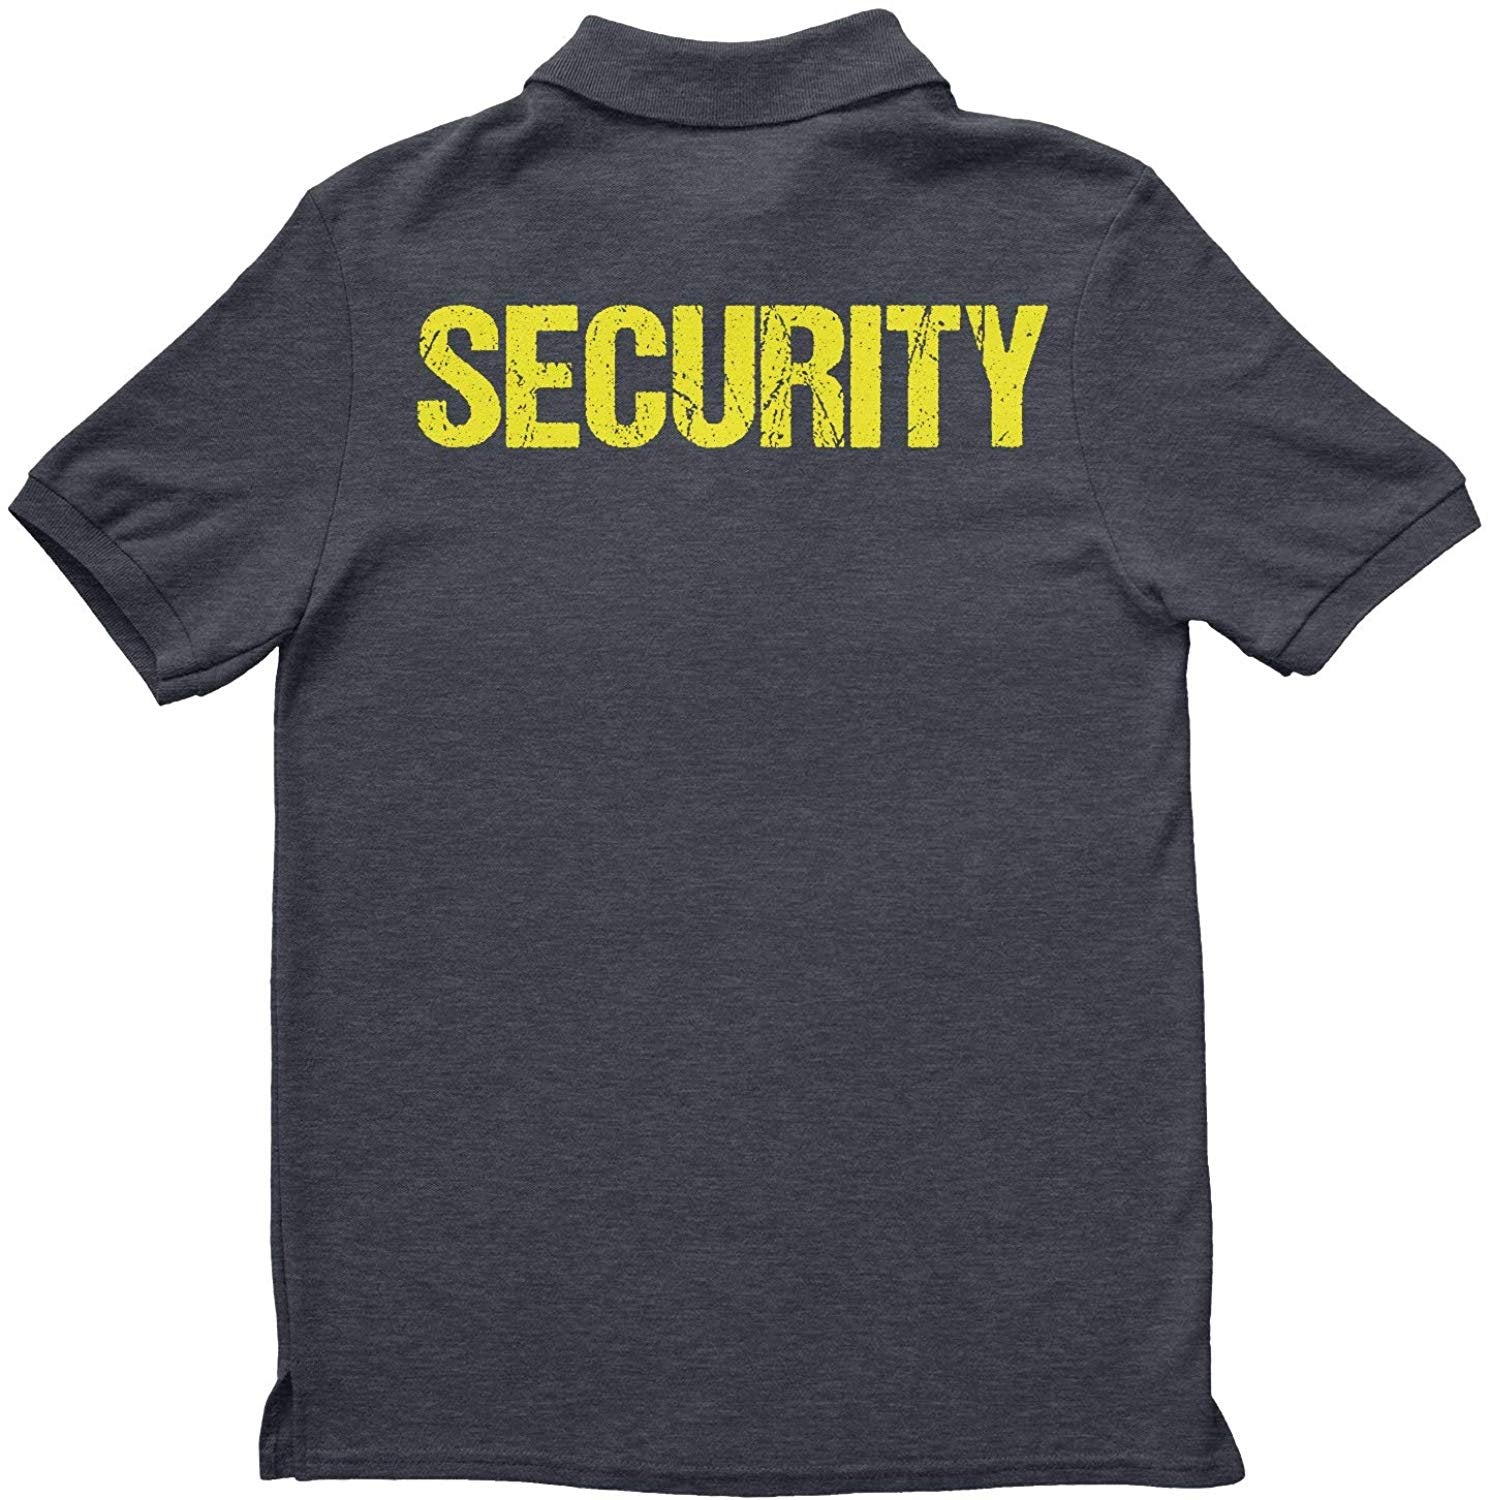 Security Polo Shirt Front & Back Print (Distressed, Charcoal & Neon)